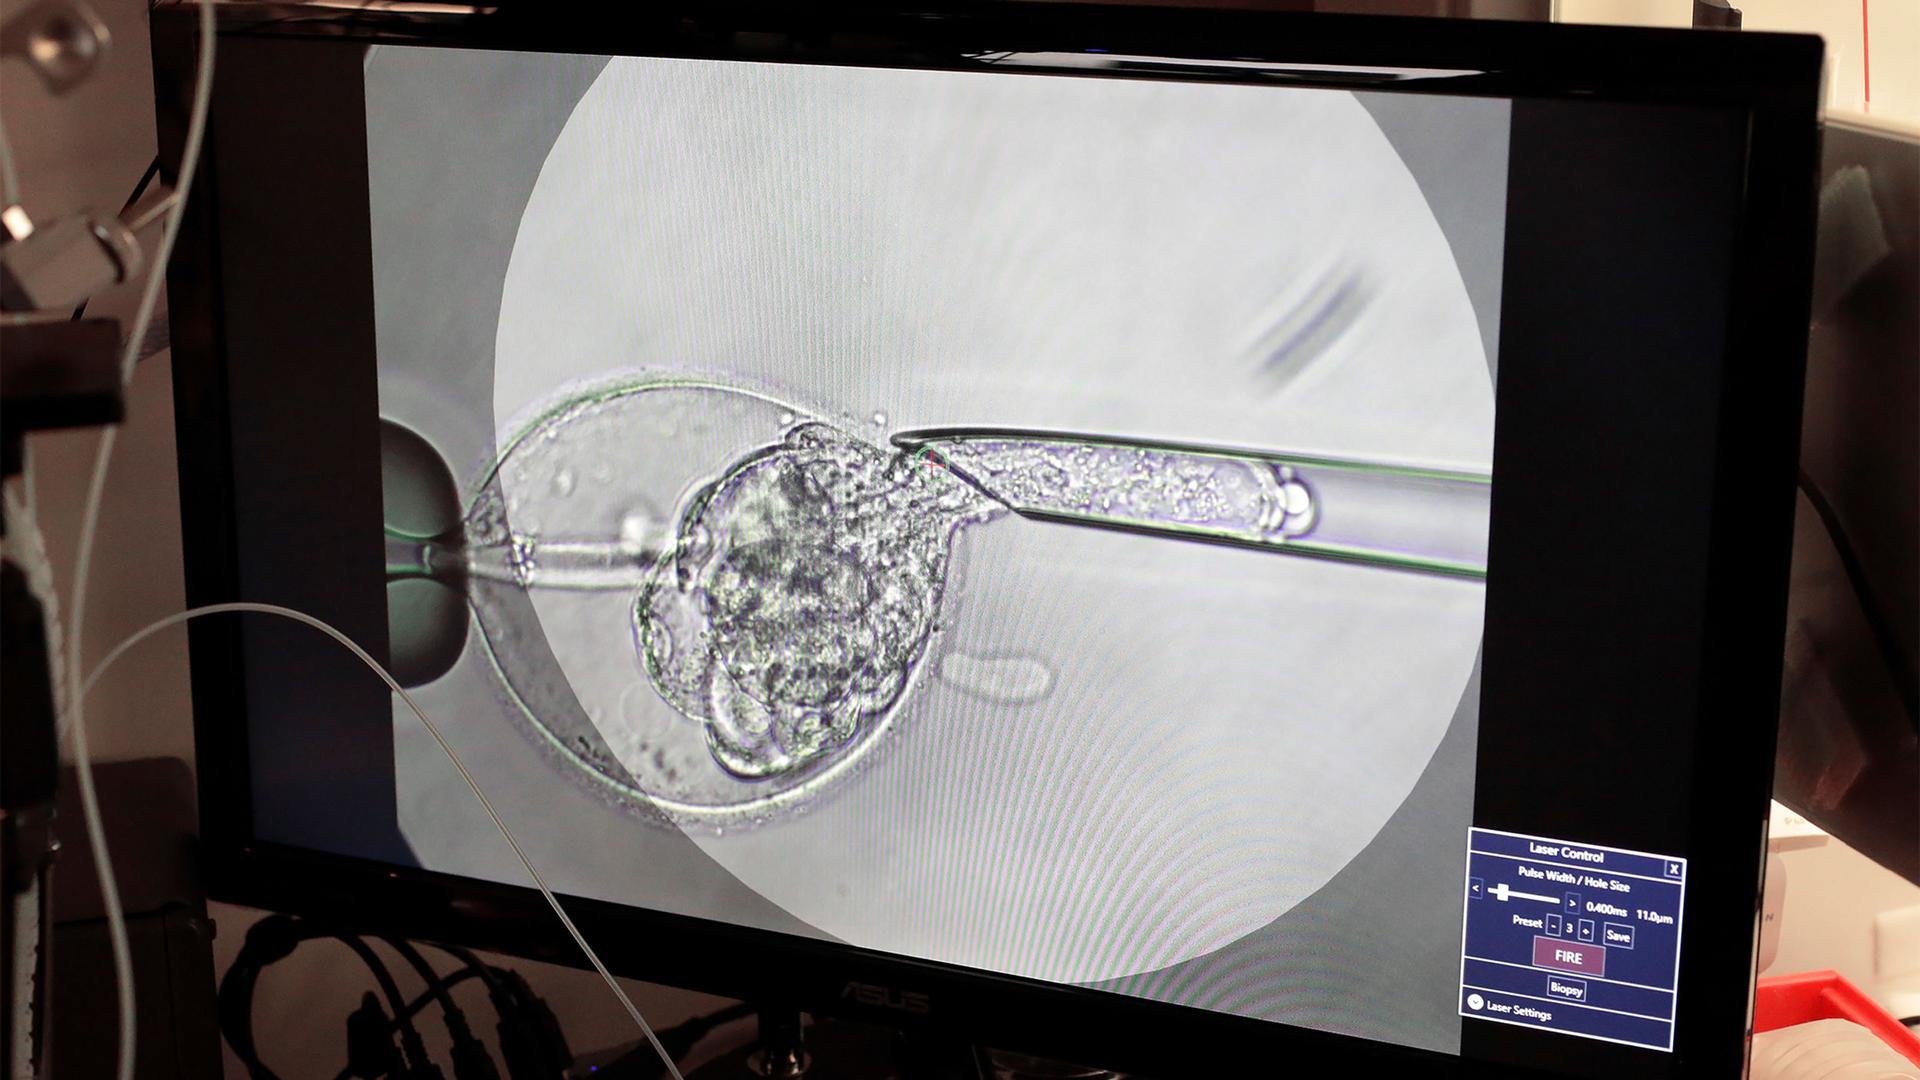 A view of the process on a montior as lab staff use a microscope stand and articulated hand controls to extract cells from 1-7 day old embryos that are then checked for viability at the Aspire Houston Fertility Institute in vitro fertilization lab in Hous